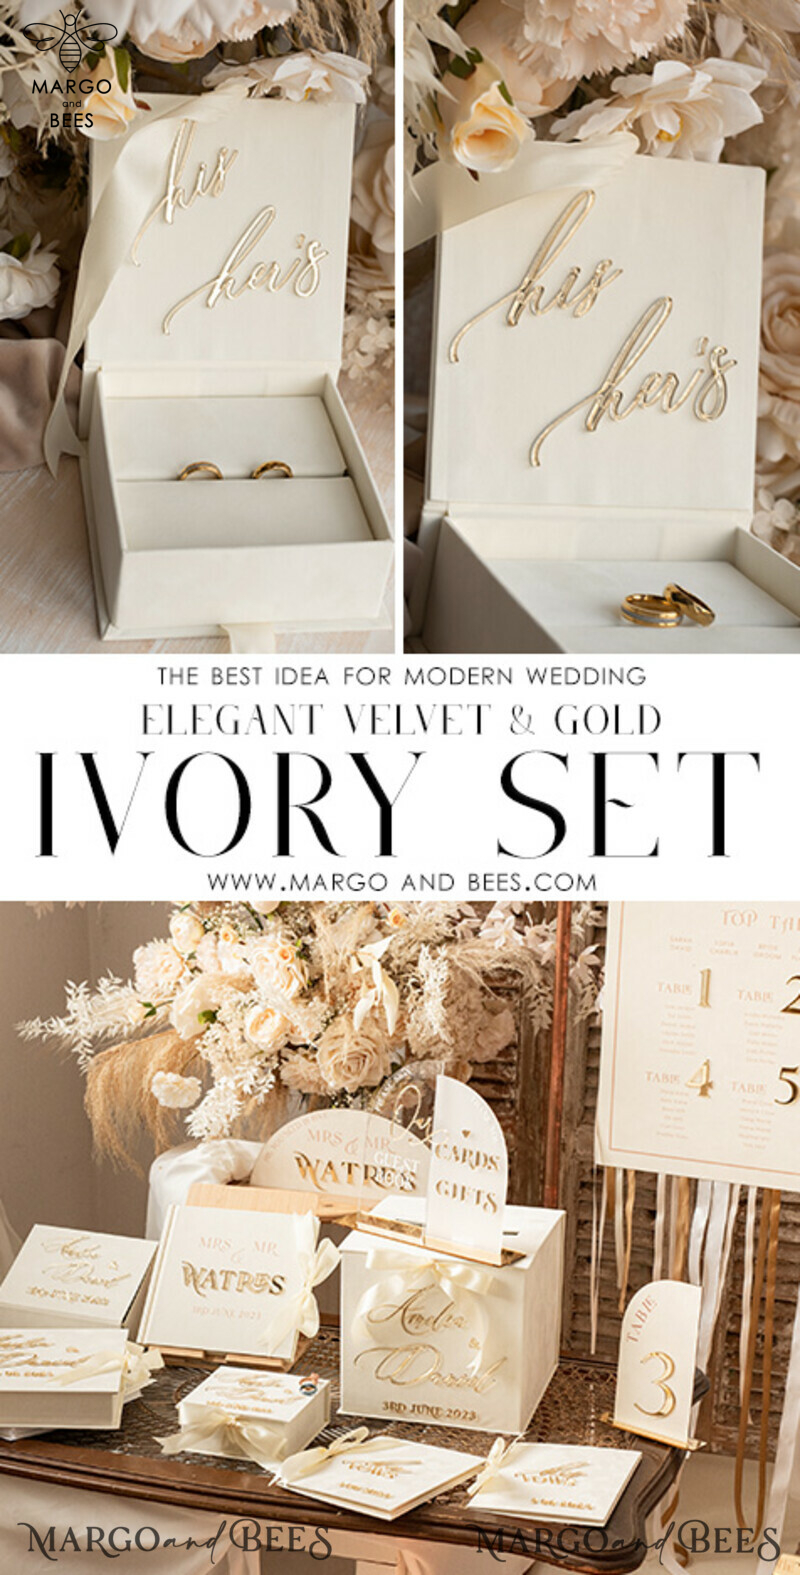 Luxury Ivory Wedding Ring Boxes: His and Hers Velvet Golden Double Box for a Garden Wedding-11